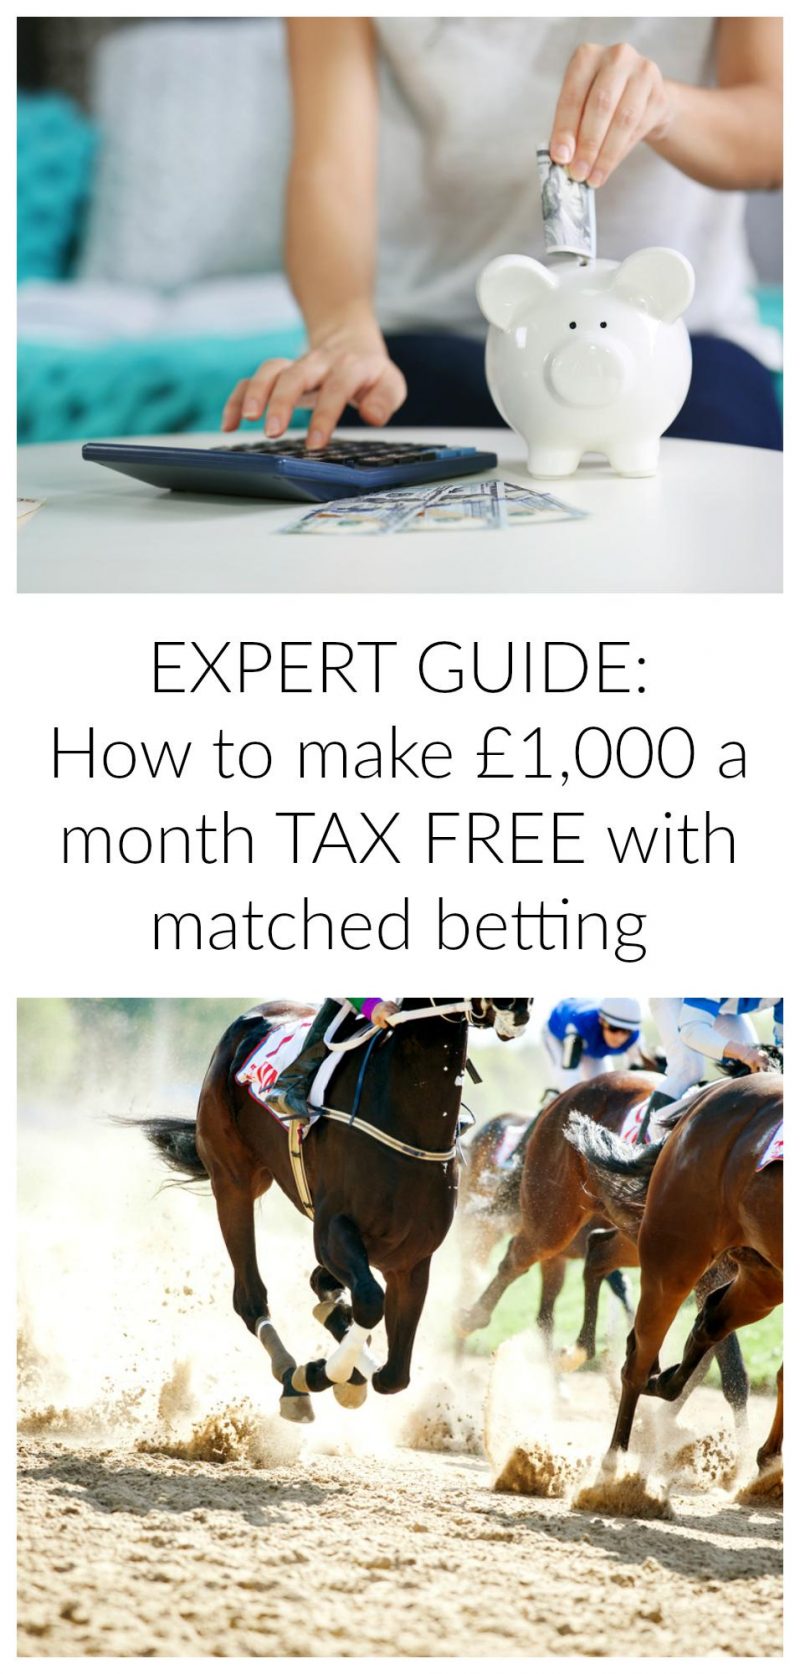 How to guide to matched betting